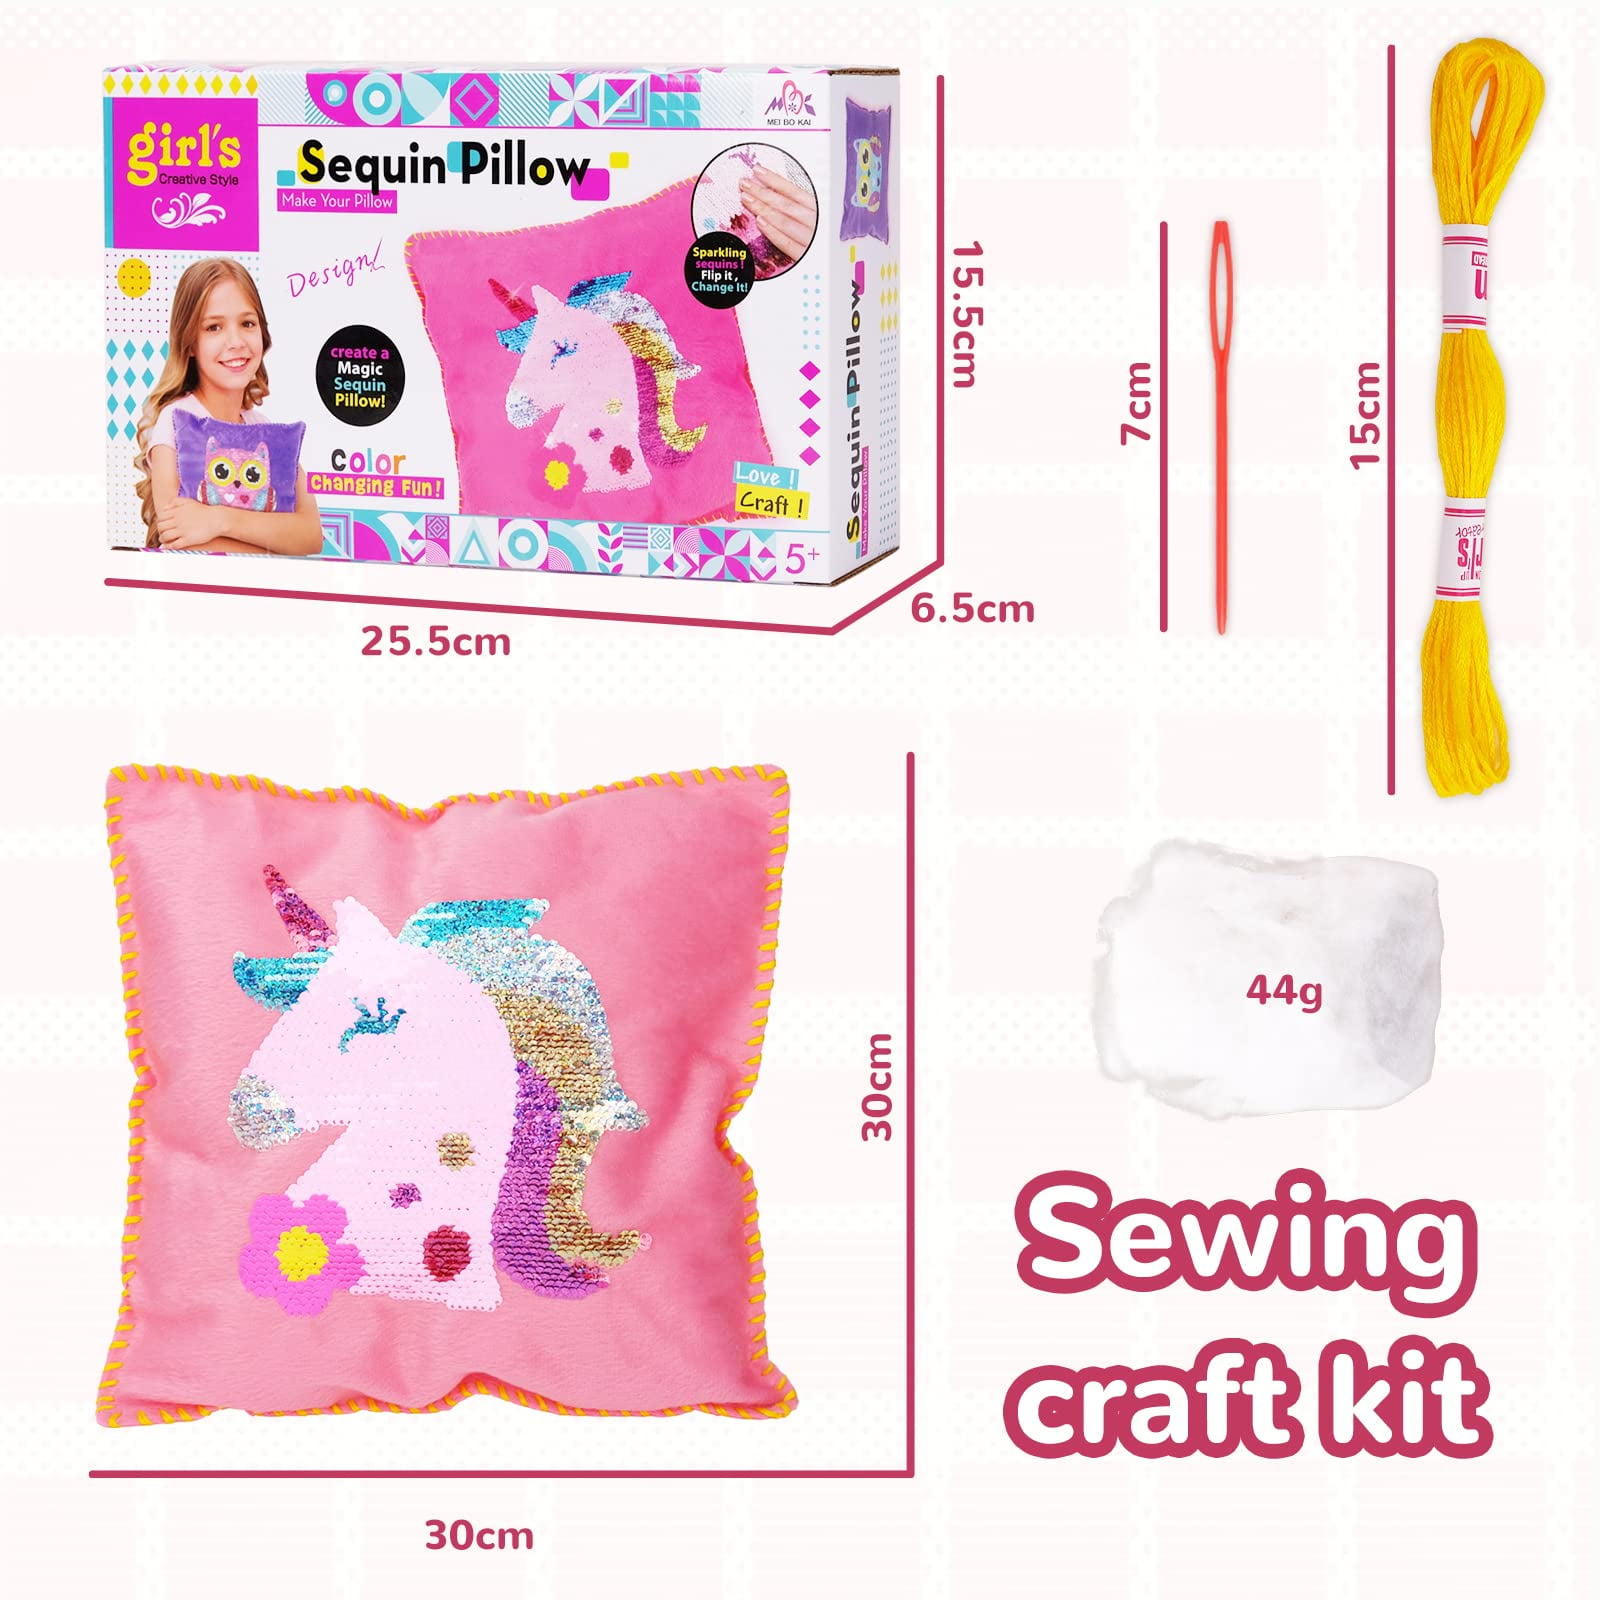 jackinthebox Learn to Sew | Unicorn Theme Kids Sewing Kit with 6 Sewing Crafts | Sewing Kit for Kids Ages 6 7 8 9 10 | Premium Quality Felt | Has